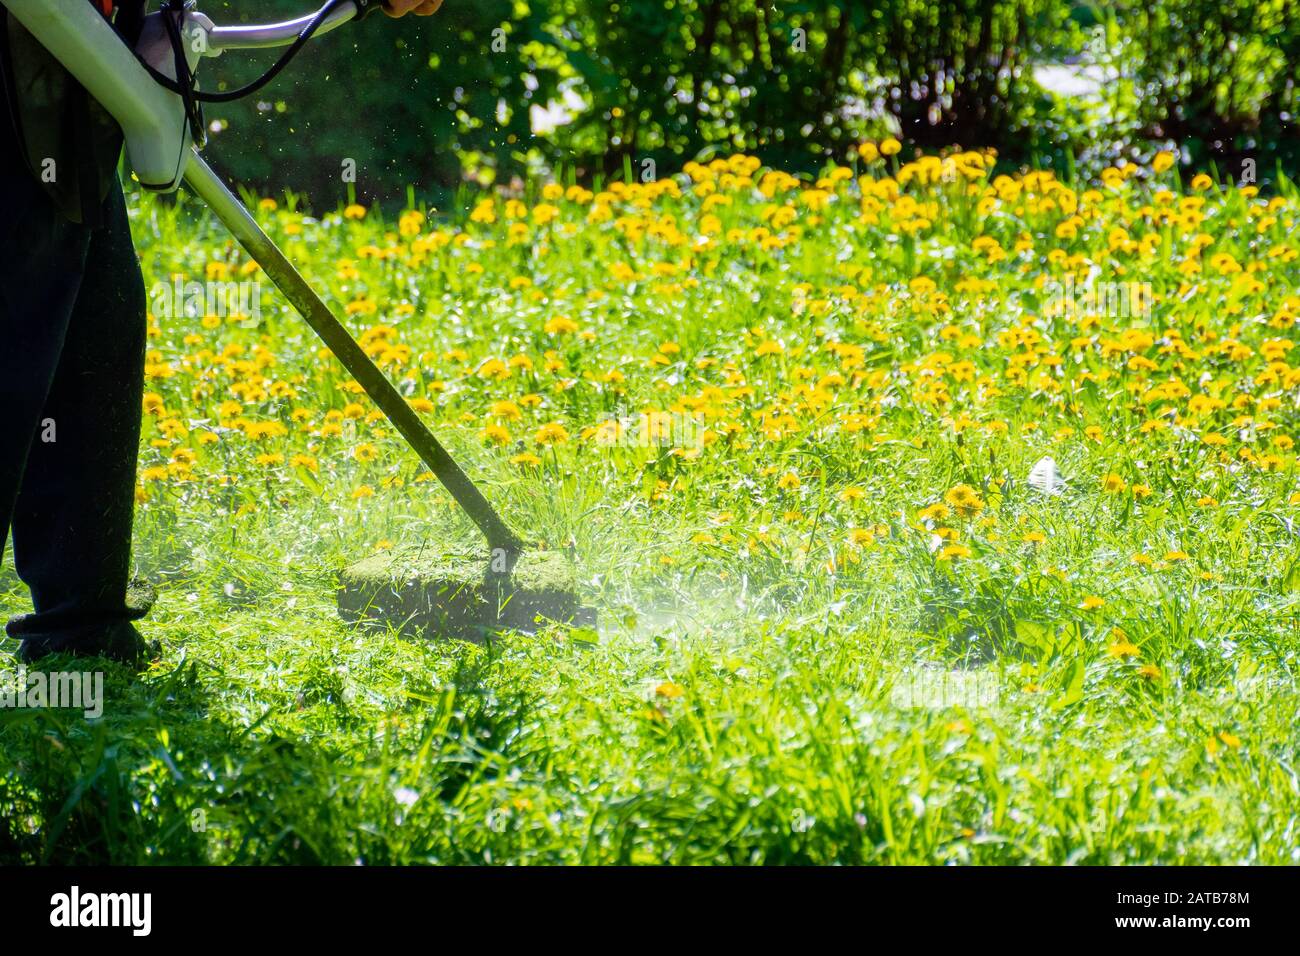 trimming dandelions and other weeds in the yard. an overgrown backyard clearing with brush cutter. springtime lawn care concept Stock Photo